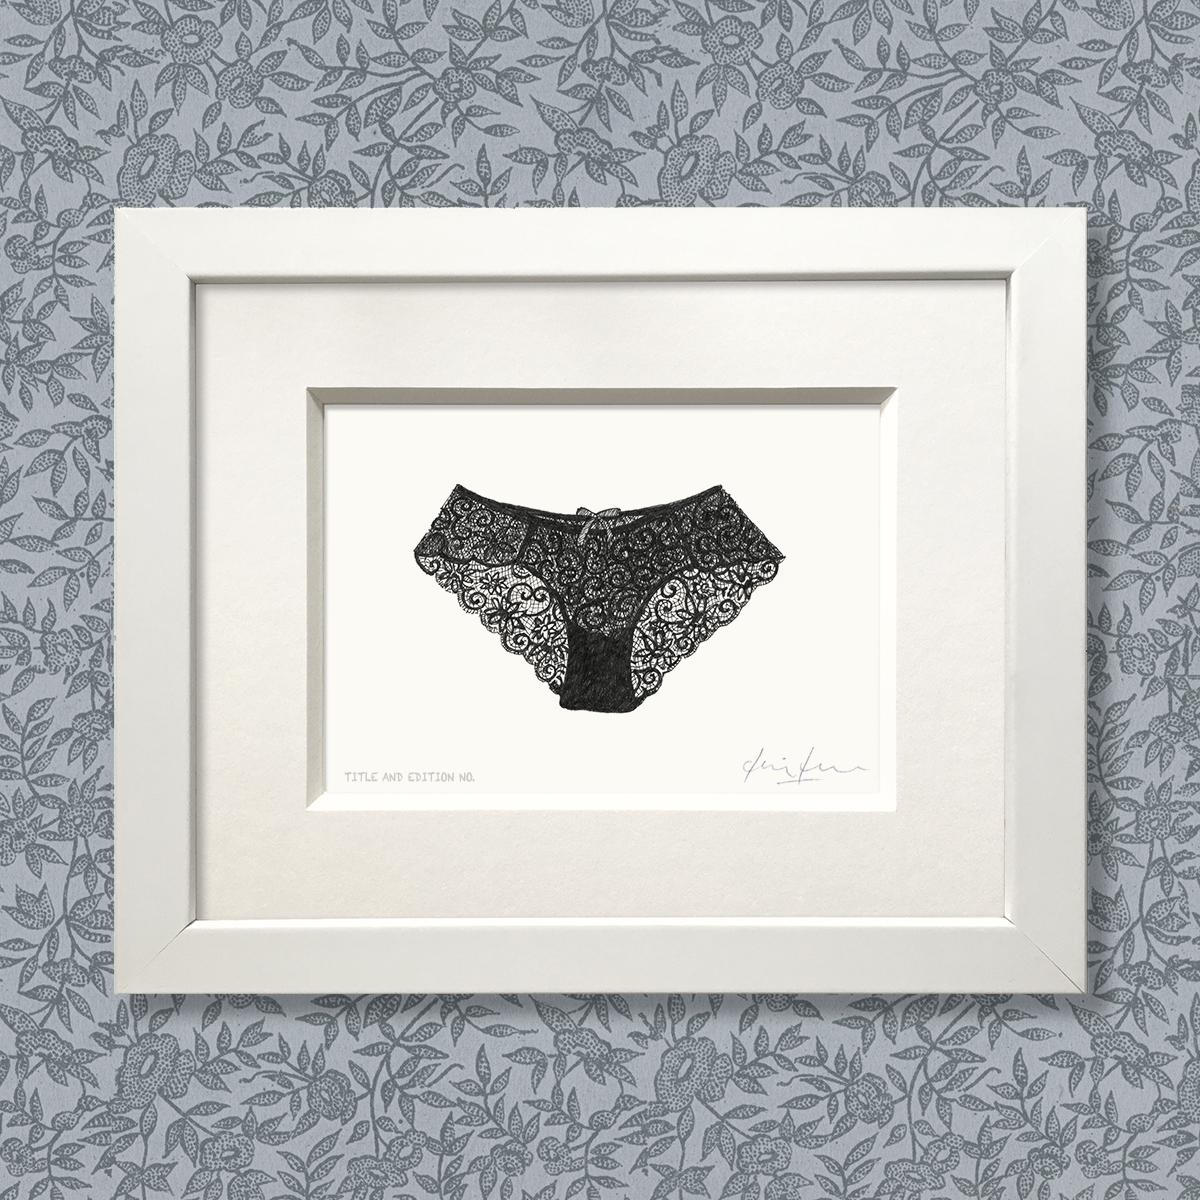 Limited edition print from pen and ink drawing of a pair of lacy knickers in a white frame